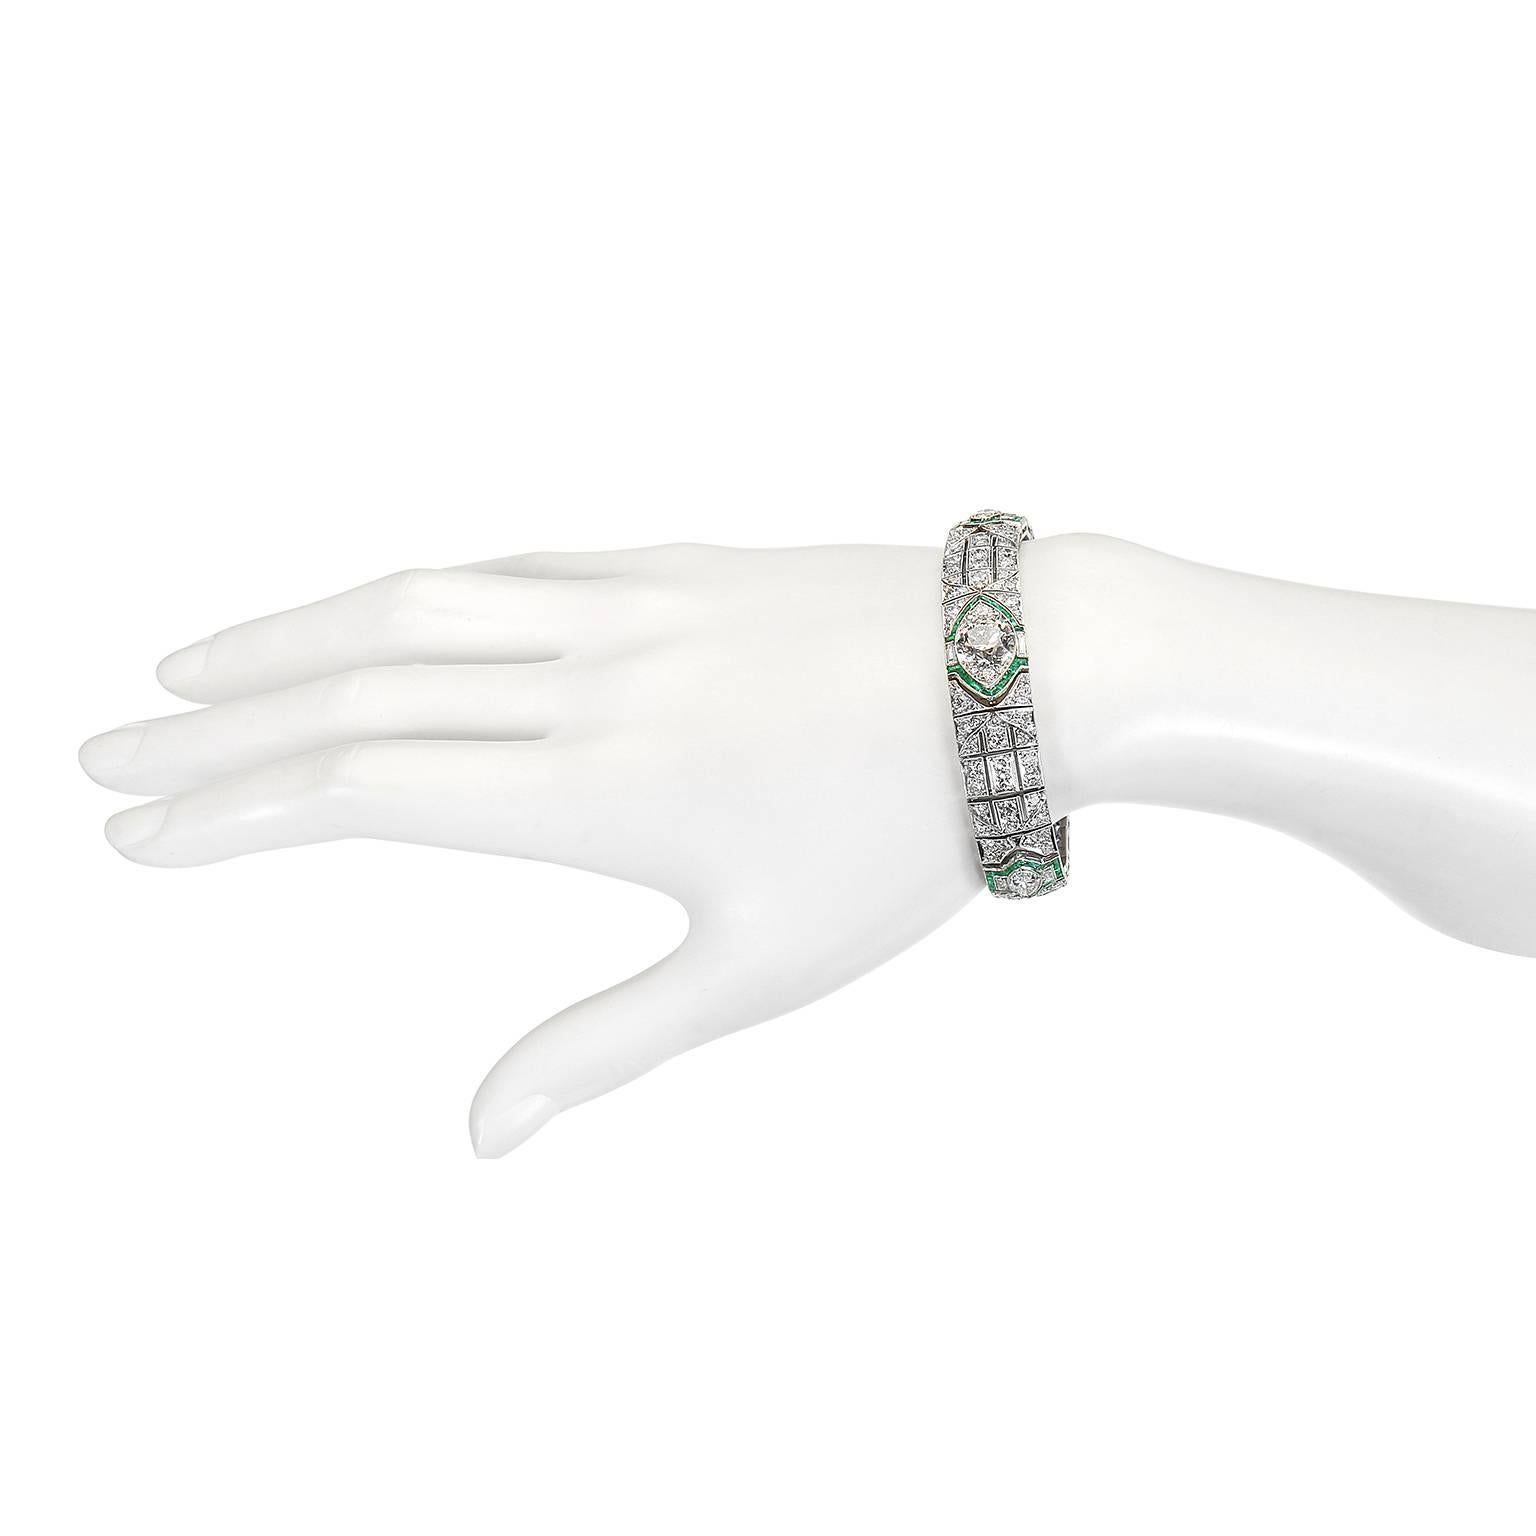 Timeless elegance in a beautifully hand-crafted Art Deco Platinum Diamond Bracelet. 
Center Diamond is an old European cut, weighing 3.12 carats (actual weight). J/K Color, VVS2 Clarity.
Two (2) marquise diamonds flank the center diamond and weigh